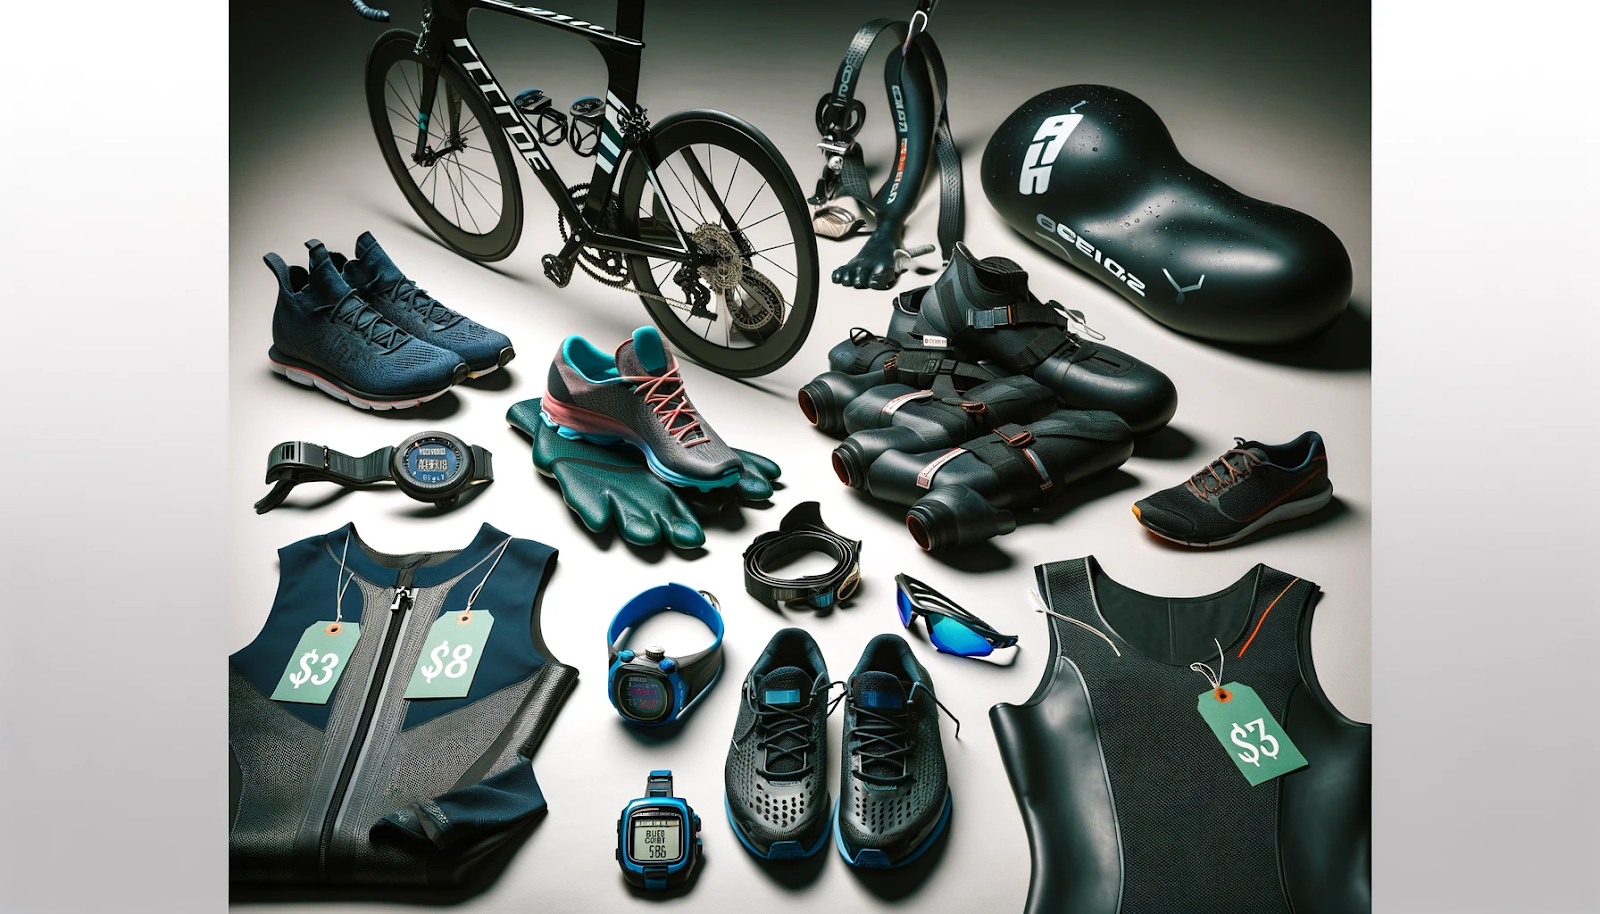  image showcases a variety of triathlon equipment neatly arranged. At the center is a high-end racing bicycle, flanked by essential items like running shoes, a wetsuit, a helmet, swimming goggles, and a stopwatch. Each item prominently displays a price tag, emphasizing the high costs involved in acquiring this gear